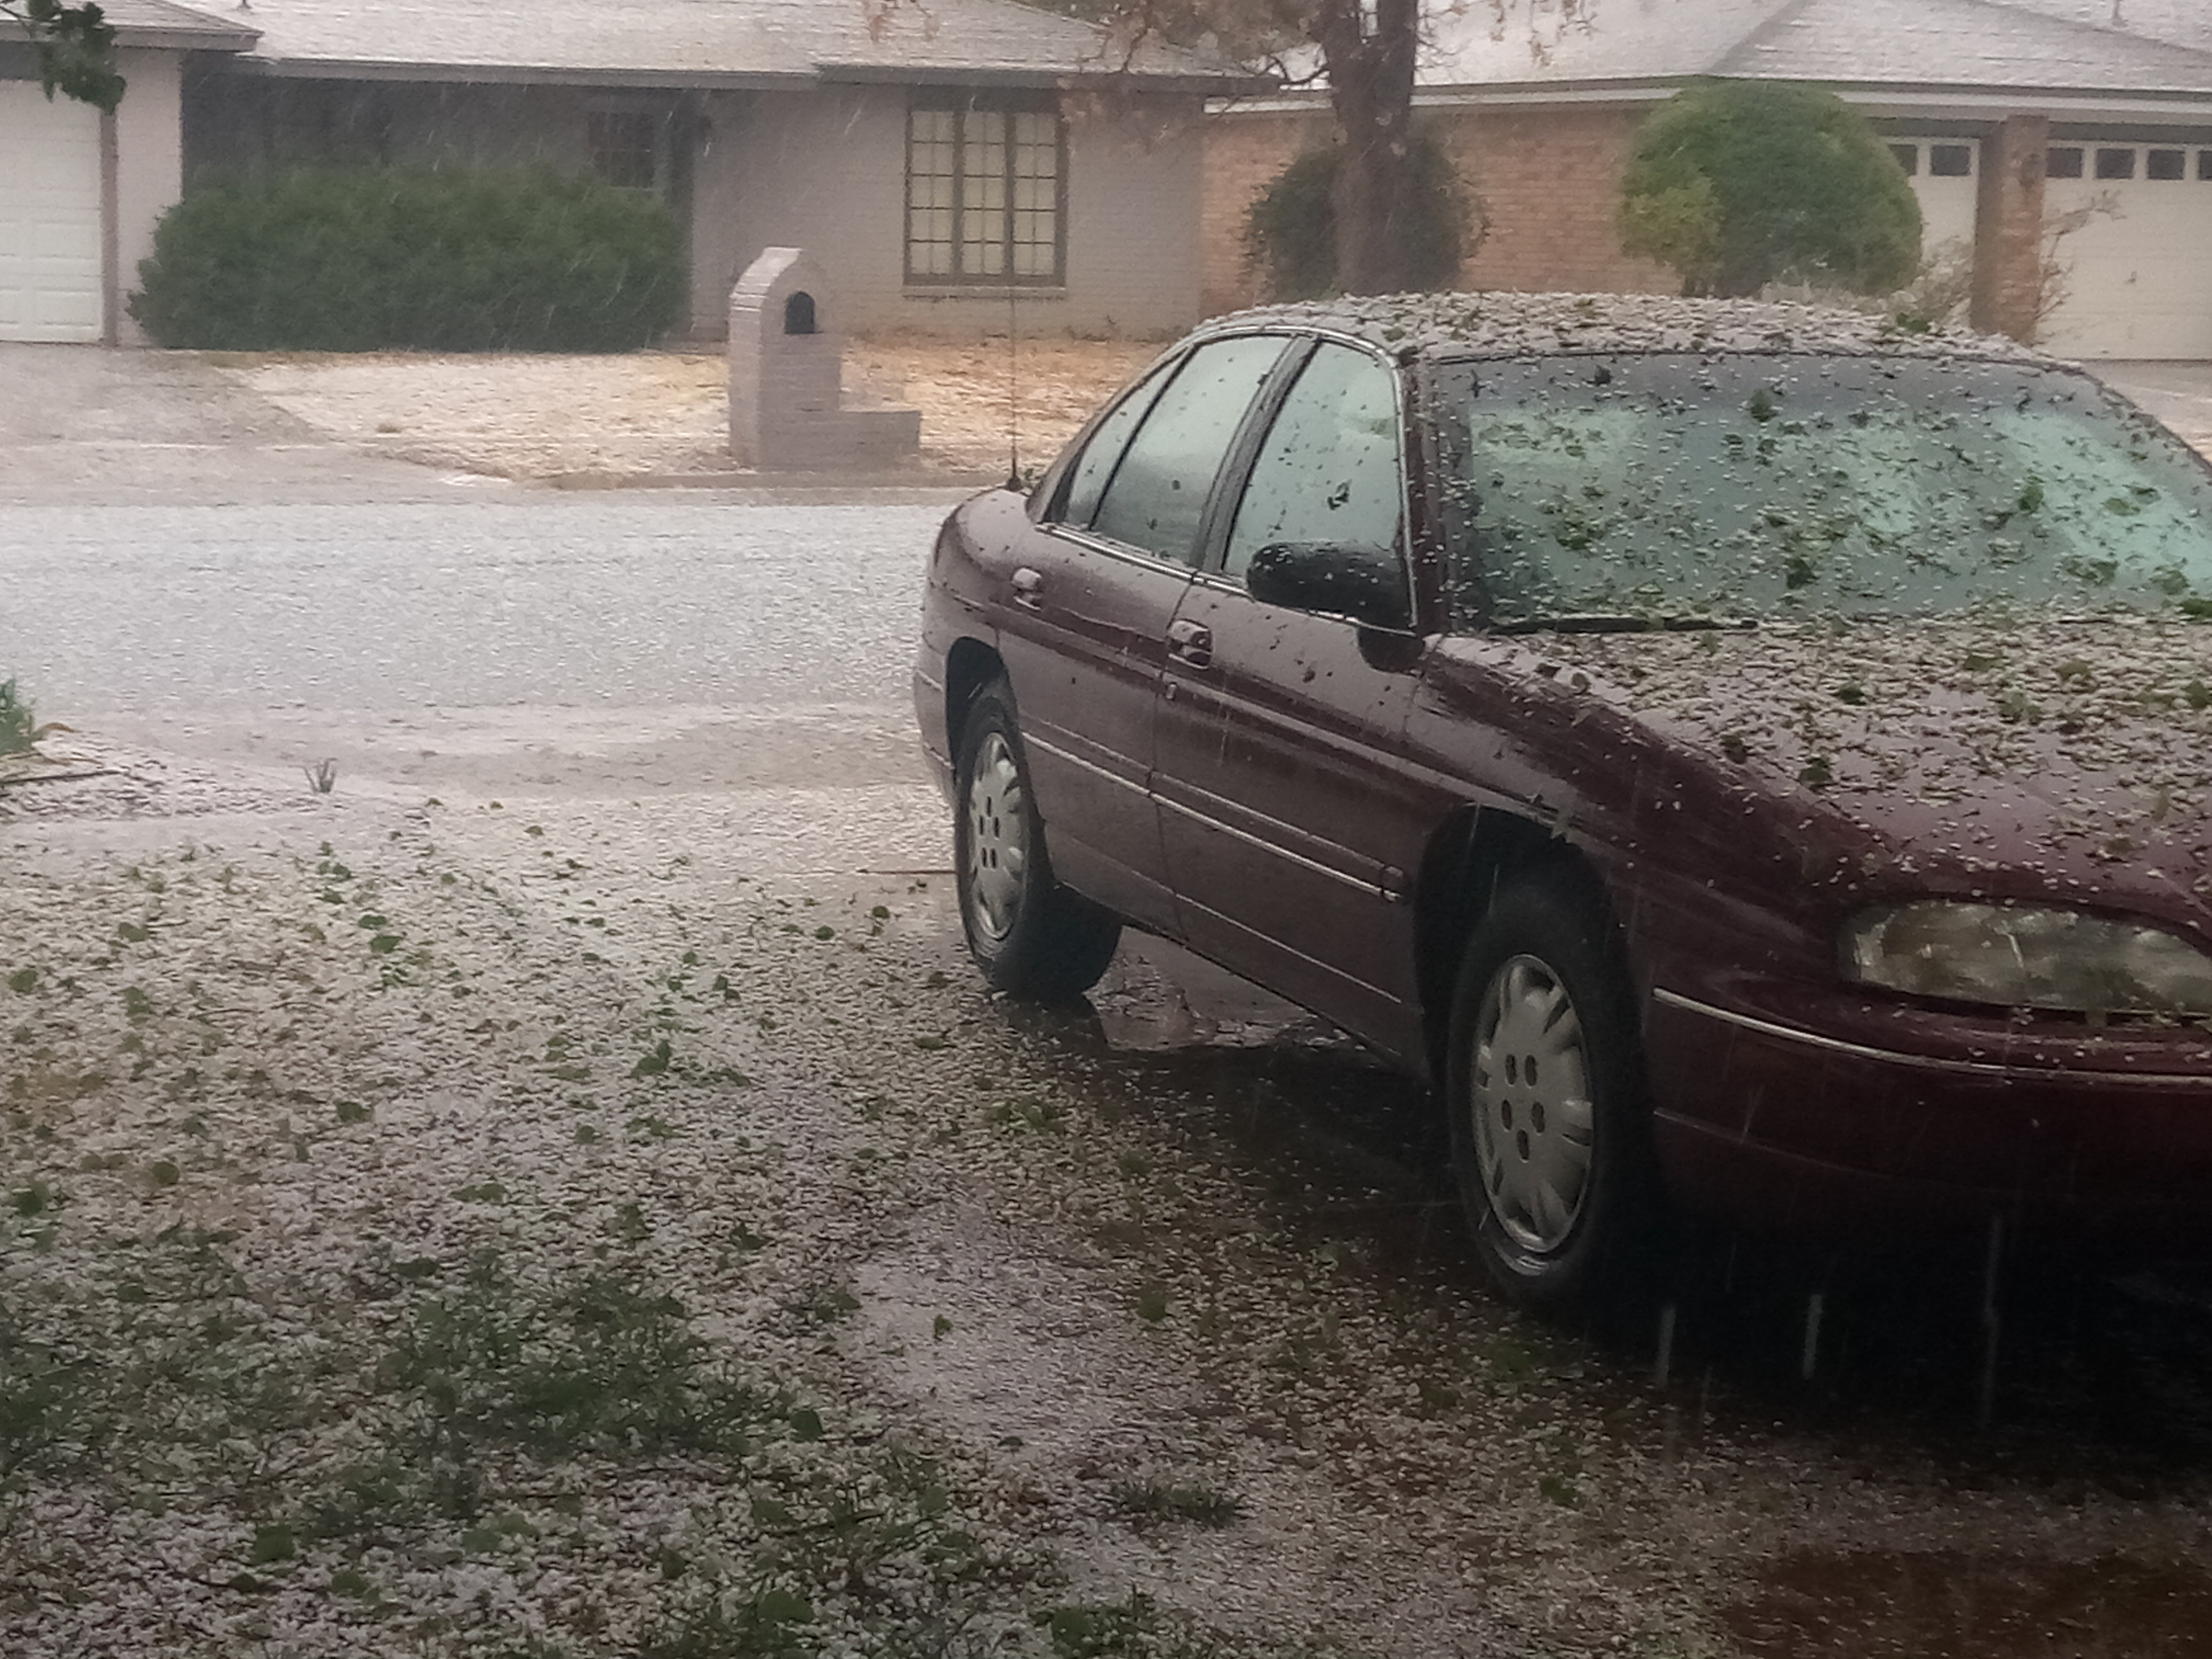 Picture of small but abundant hail that fell across southern Lubbock Tuesday evening (27 March 2018). The picture is courtesy of Gary Skwira.